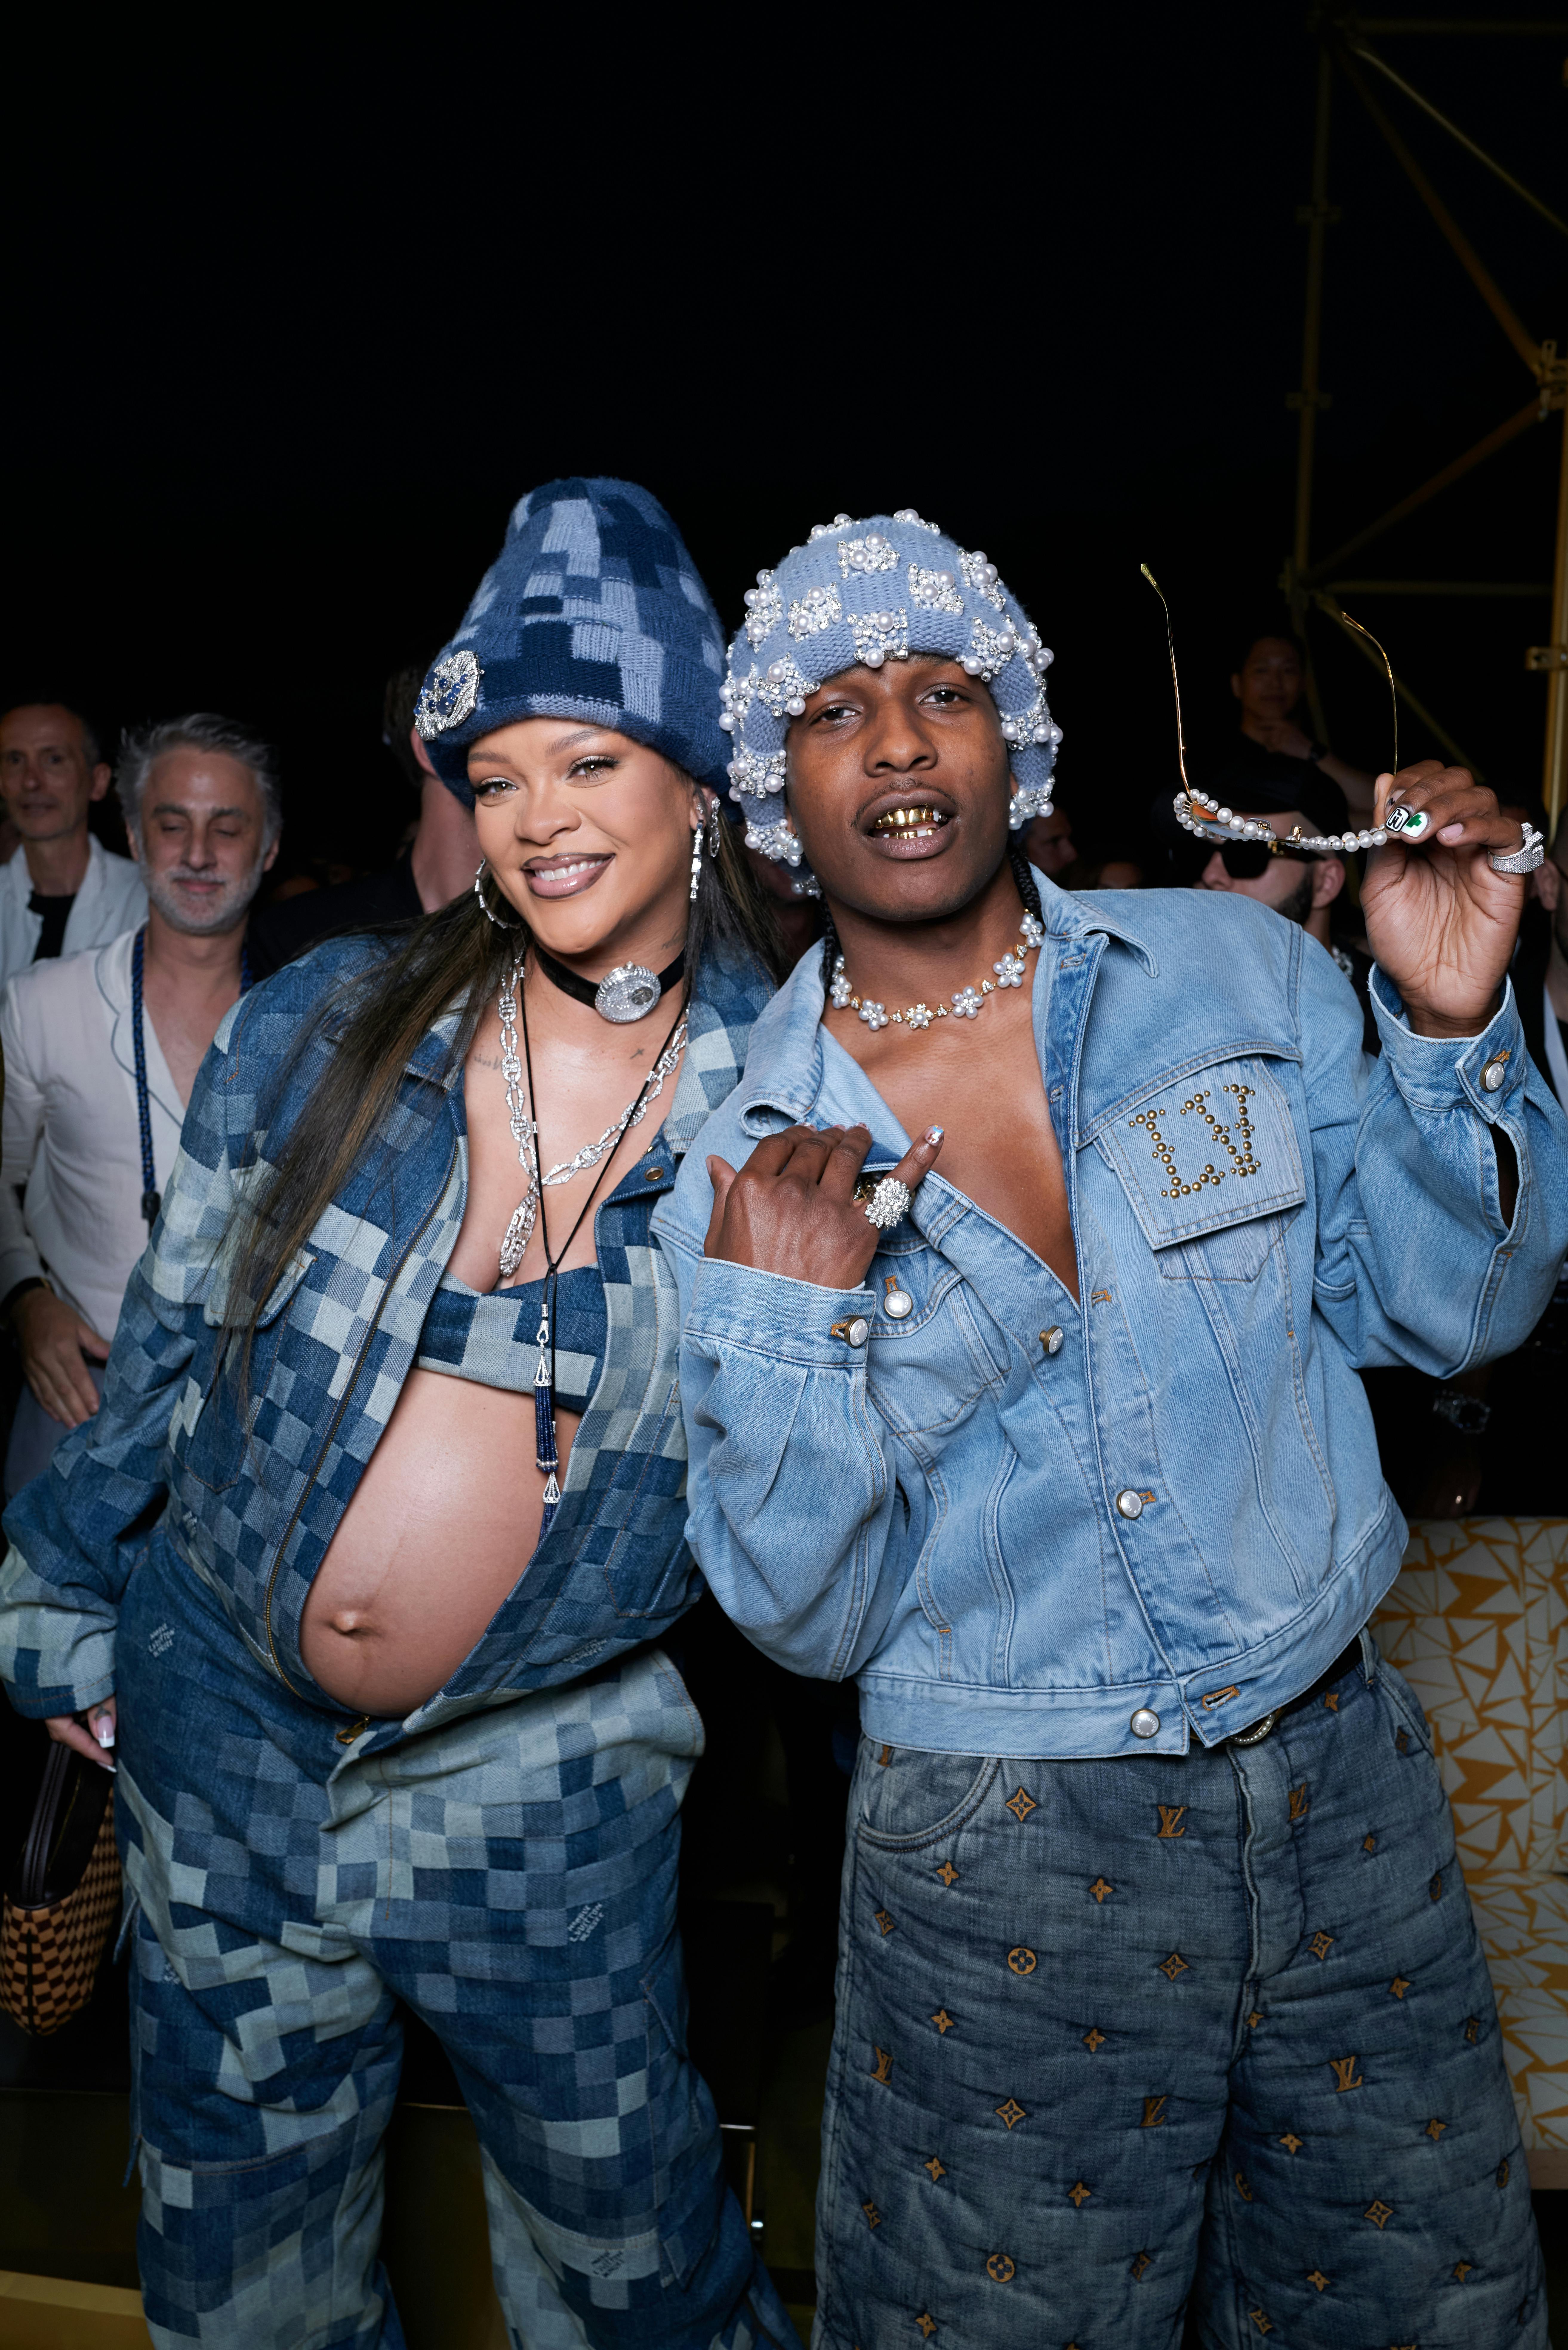 Pharrell Williams' Louis Vuitton Fashion Show Brings Out Celebs in